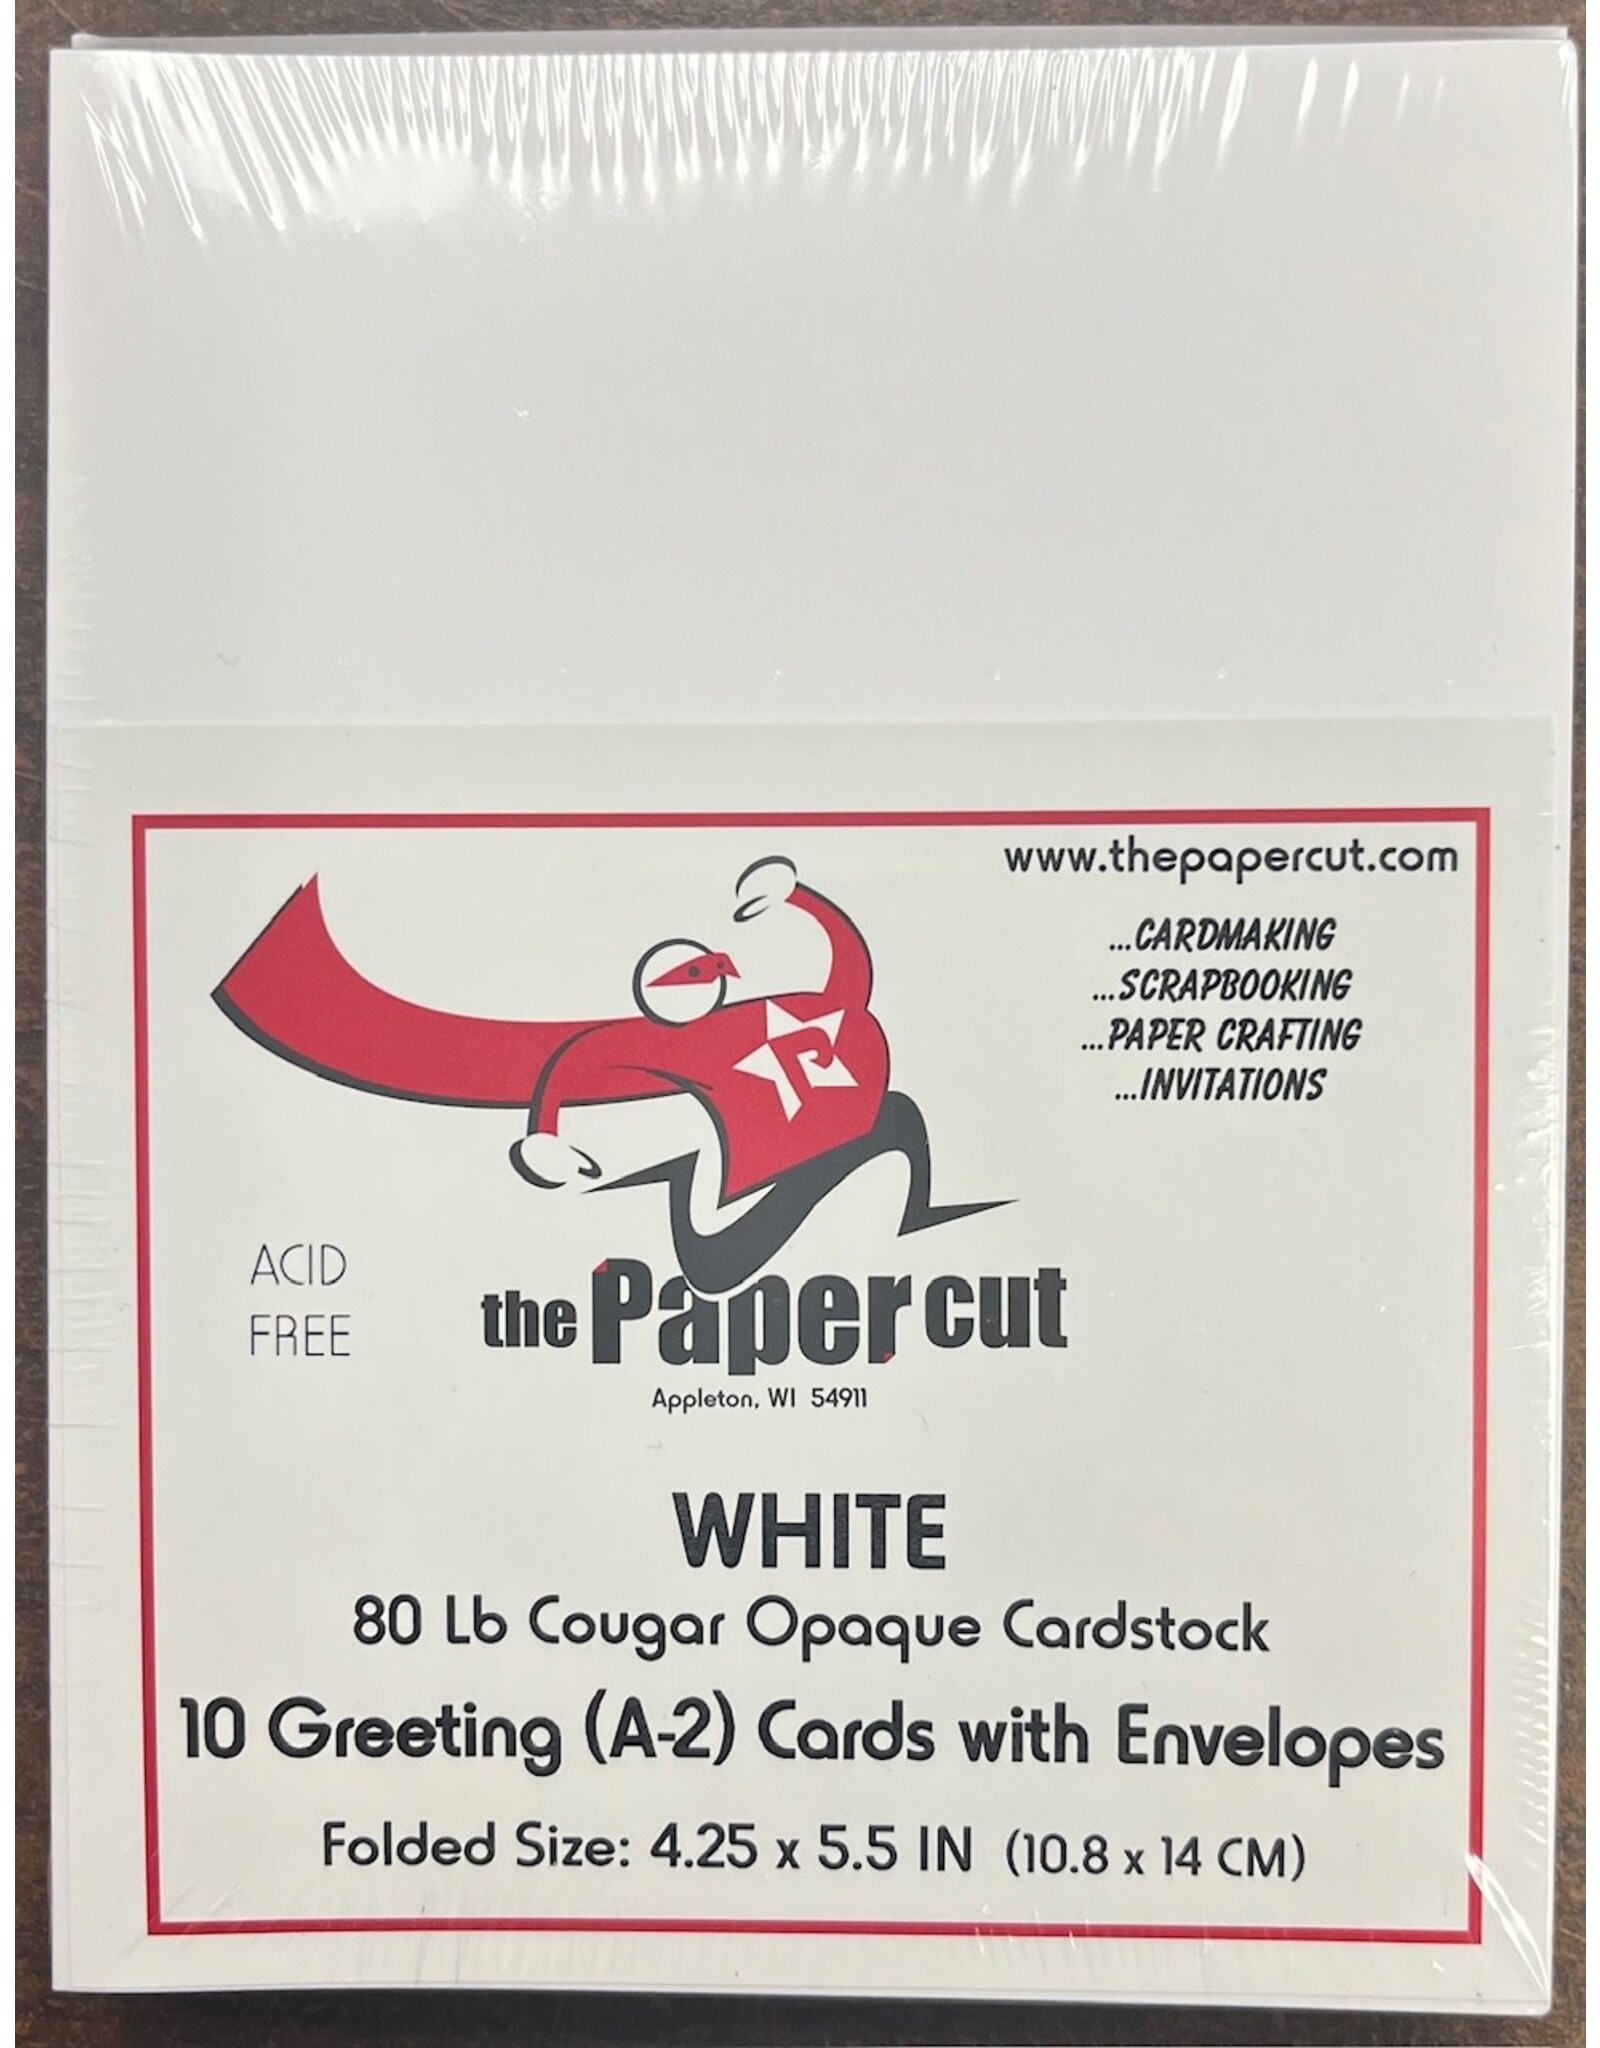 PAPER CUT THE PAPER CUT 10 GREETING (A-2) WHITE COUGAR OPAQUE 80 lb CARDS WITH ENVELOPES 4.25x5.5 FOLDED